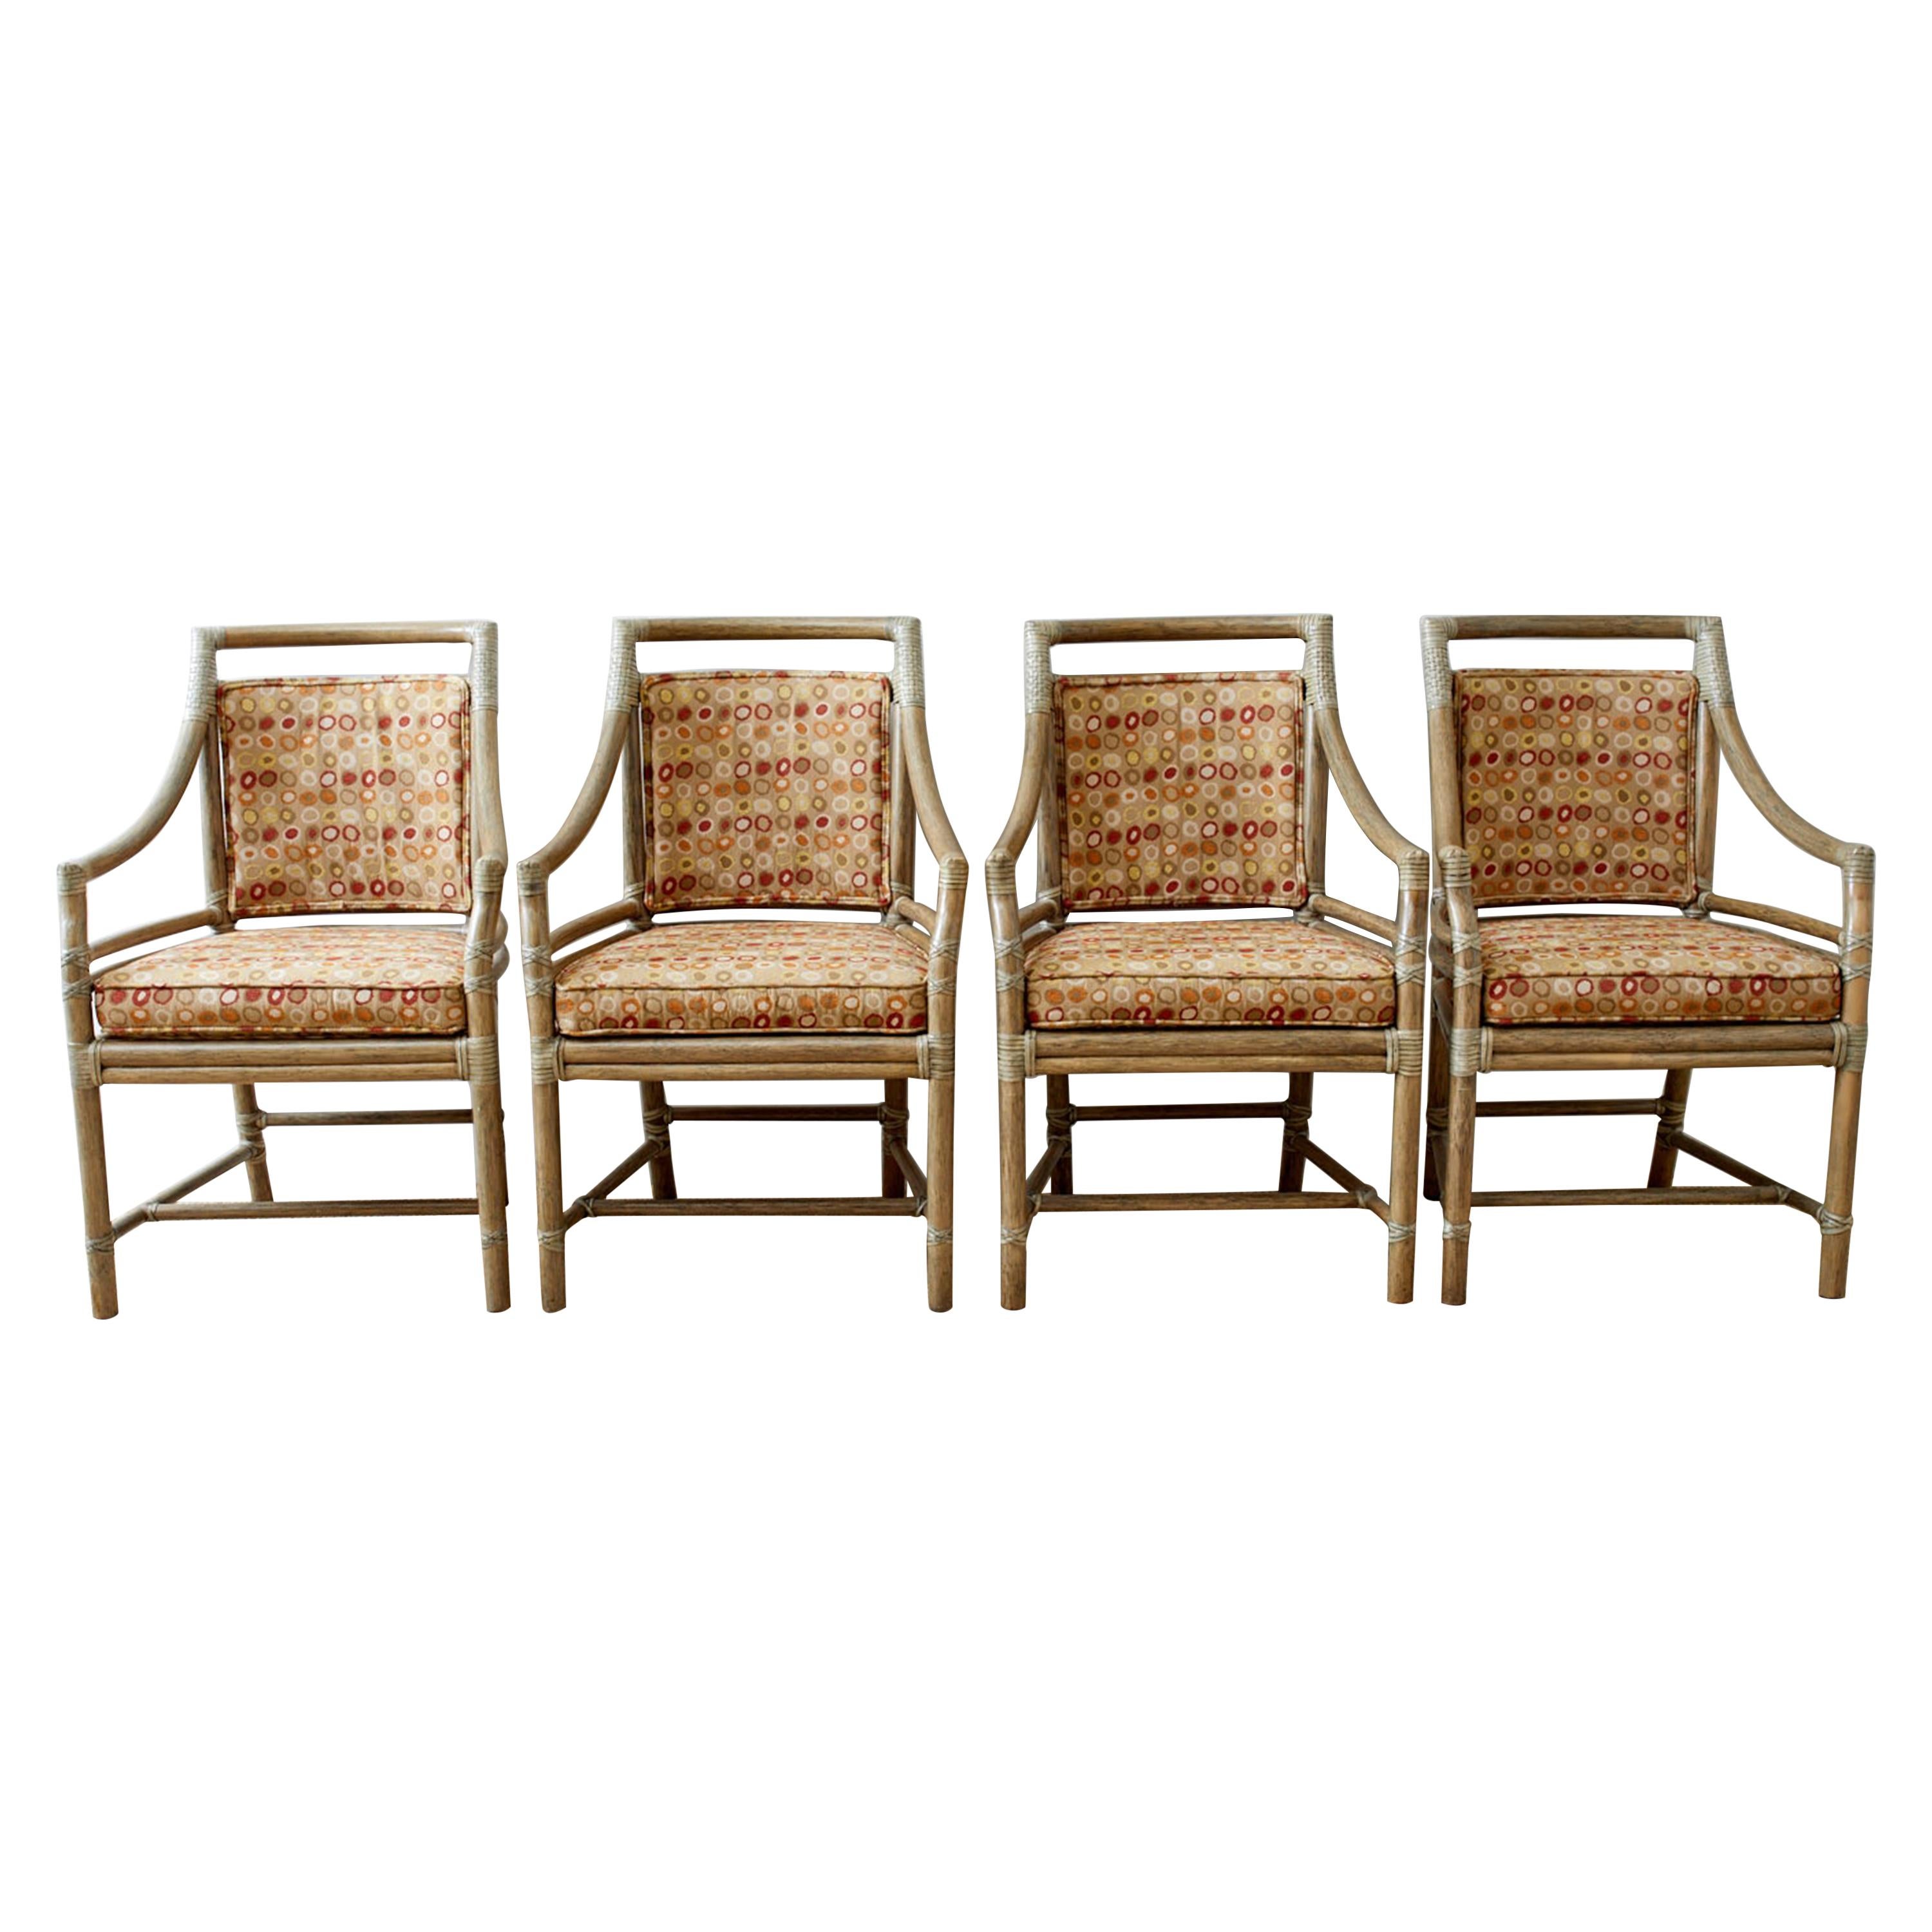 target wicker dining chairs